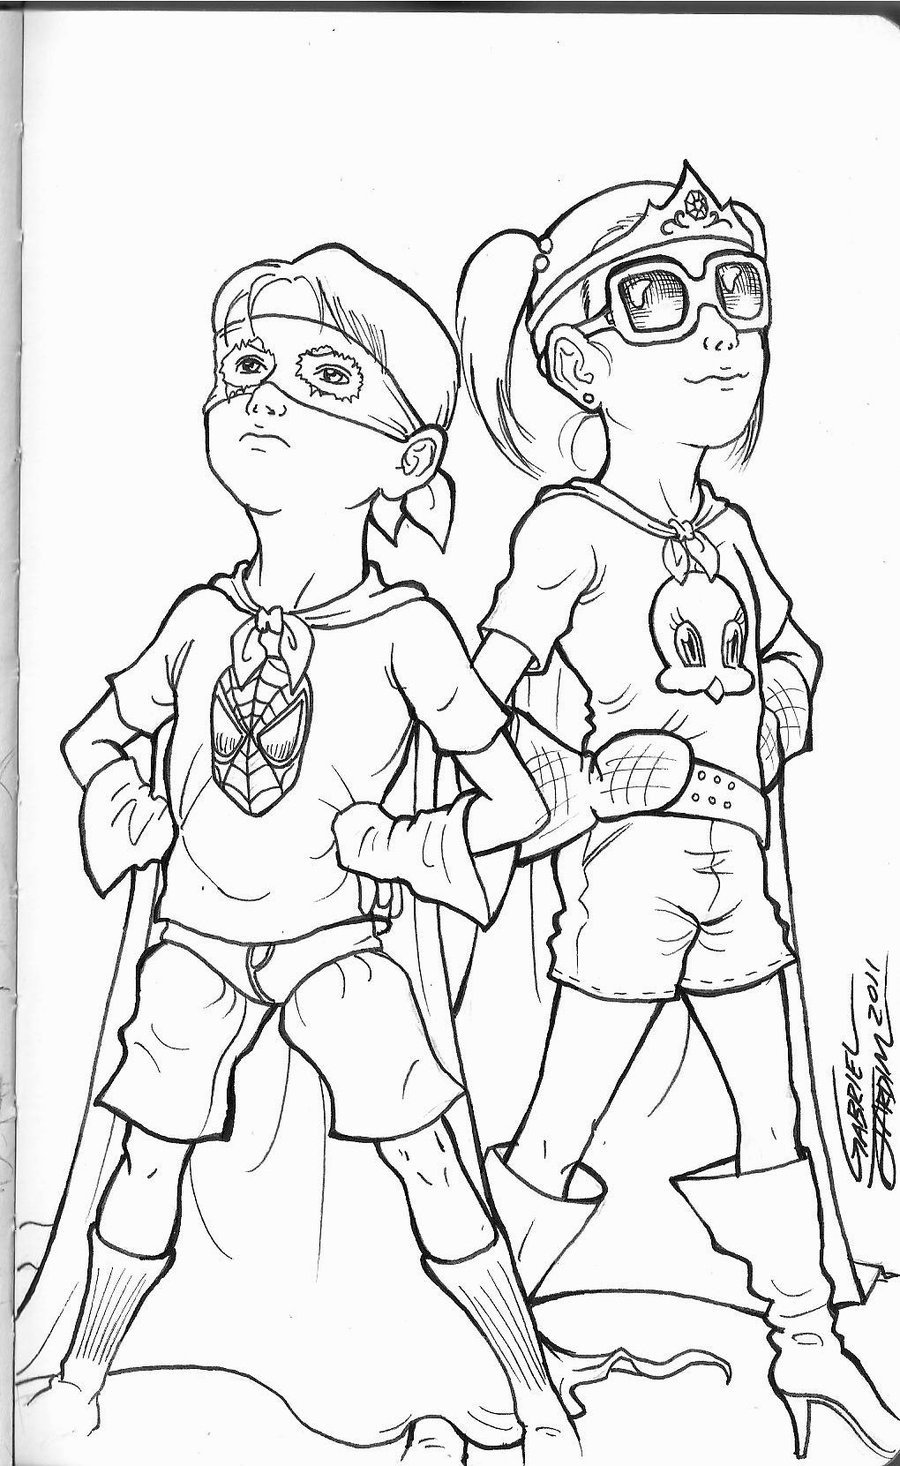 Super Heroes Coloring Page Super Hero Super Hero Coloring Pages